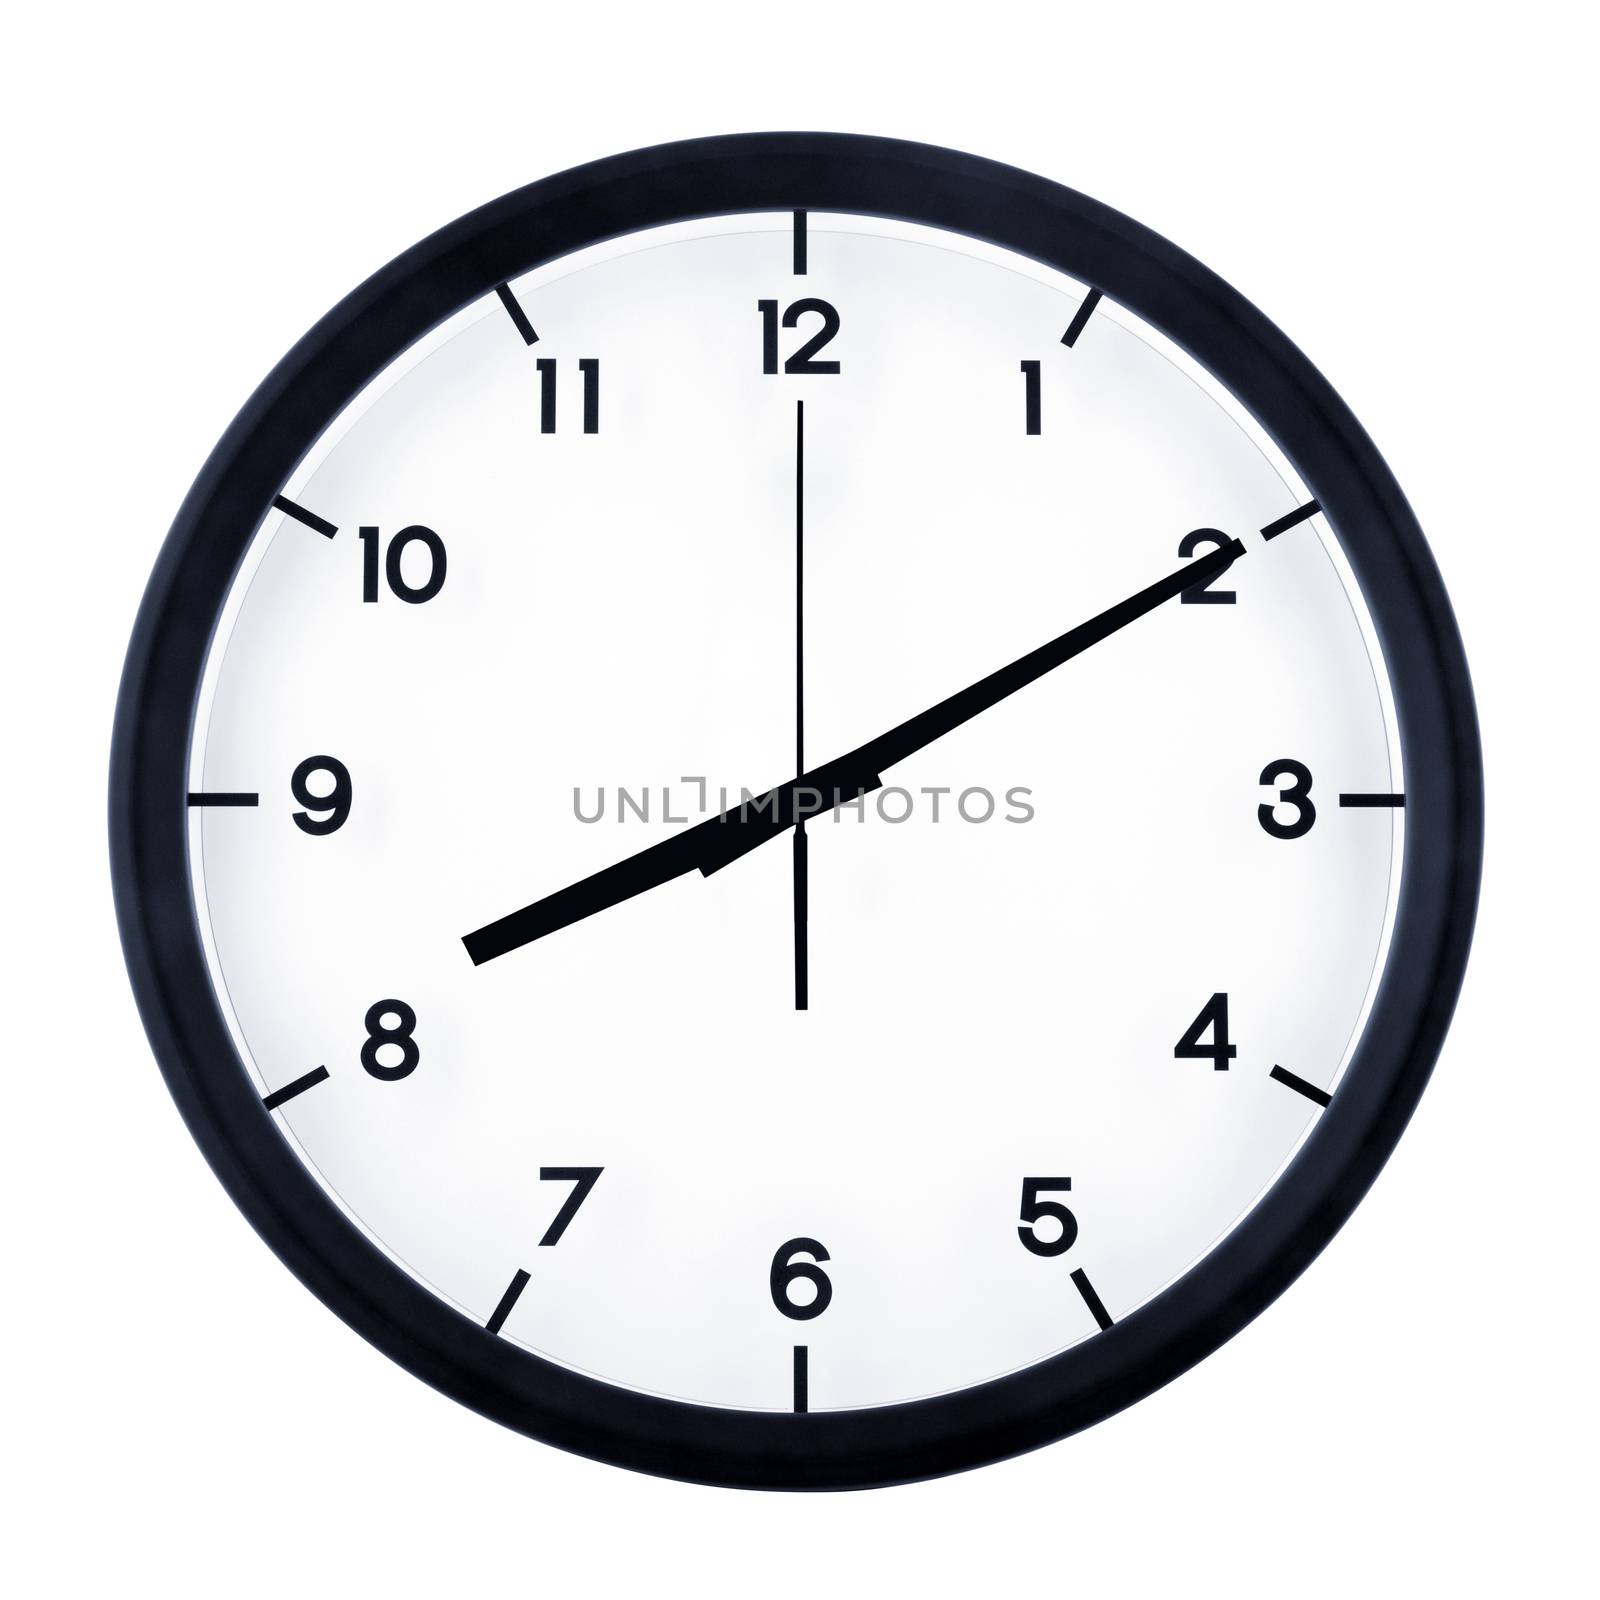 Classic analog clock pointing at eight ten, isolated on white background.